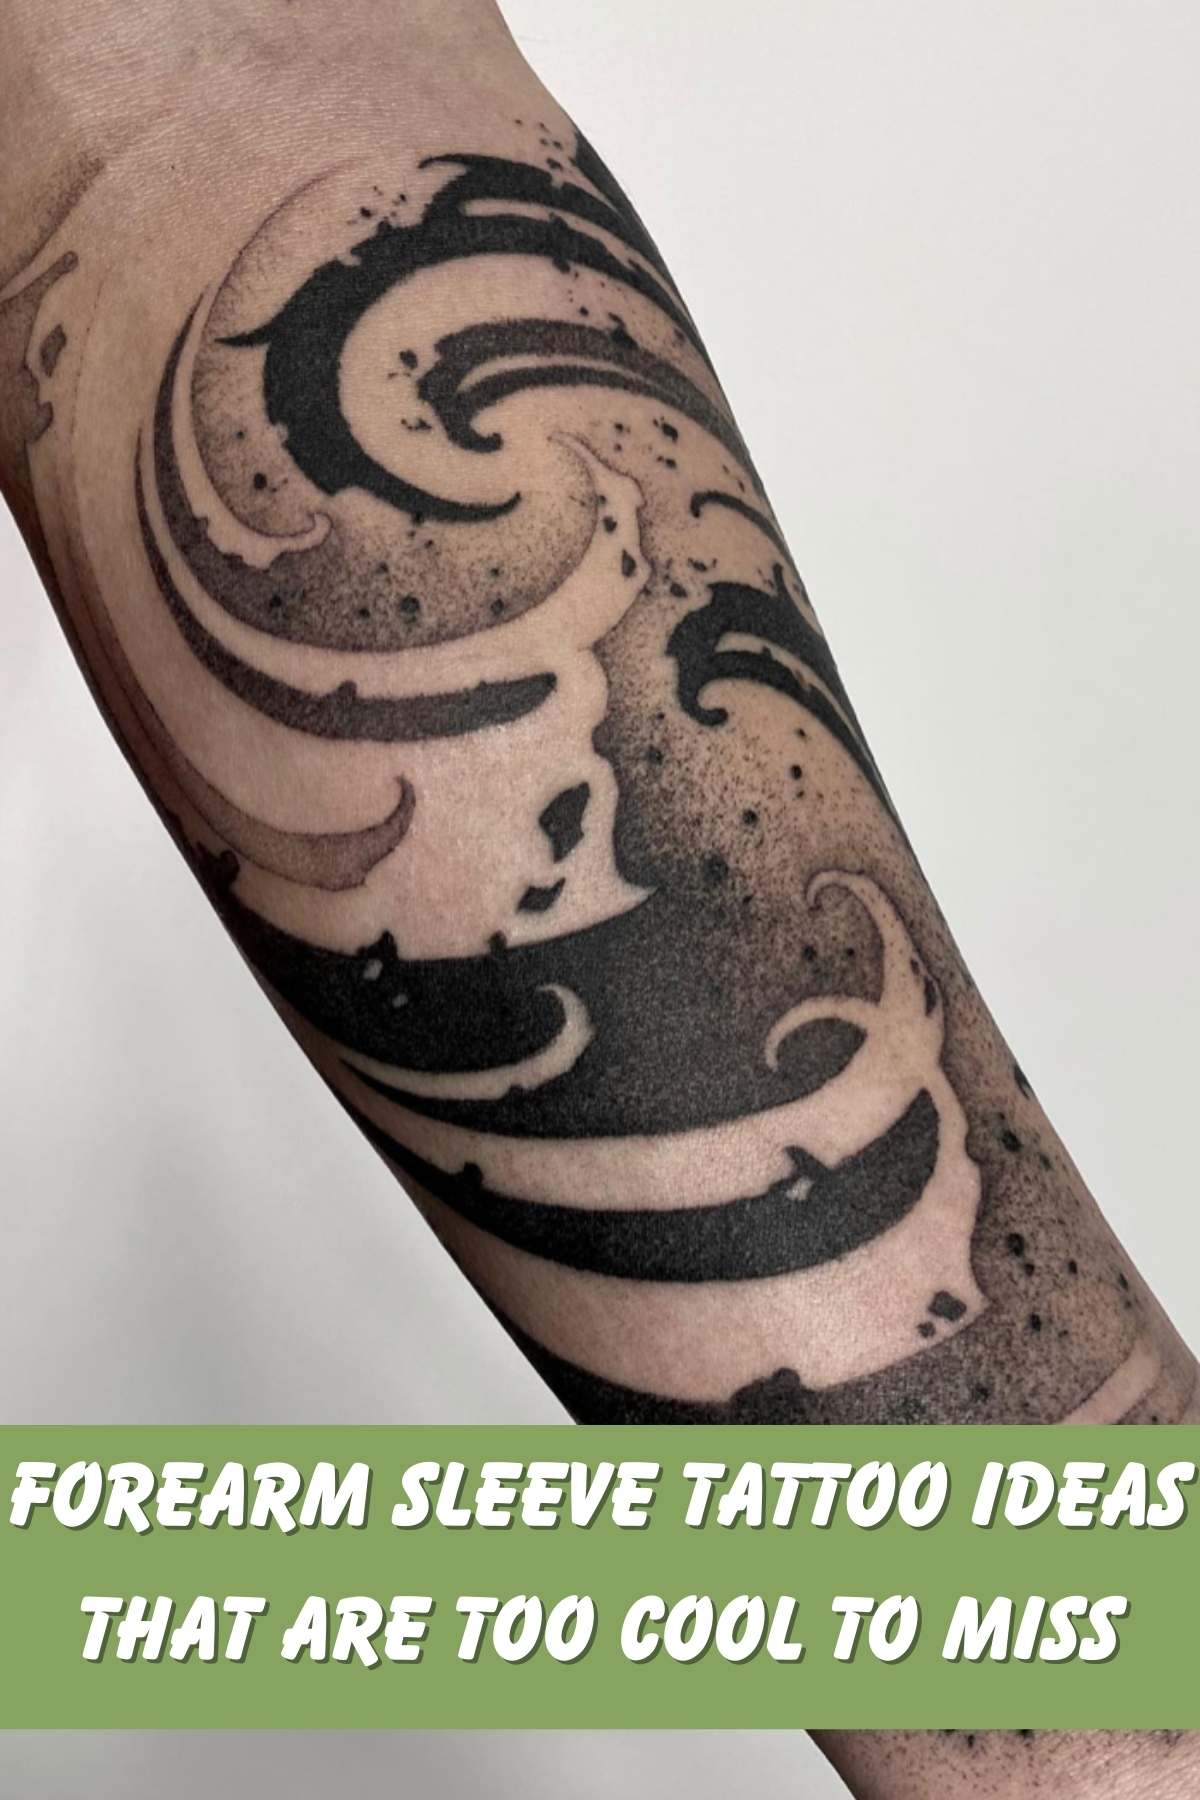 Forearm sleeve tattoo ideas that are too cool to miss. Photo of negative space tattoo.